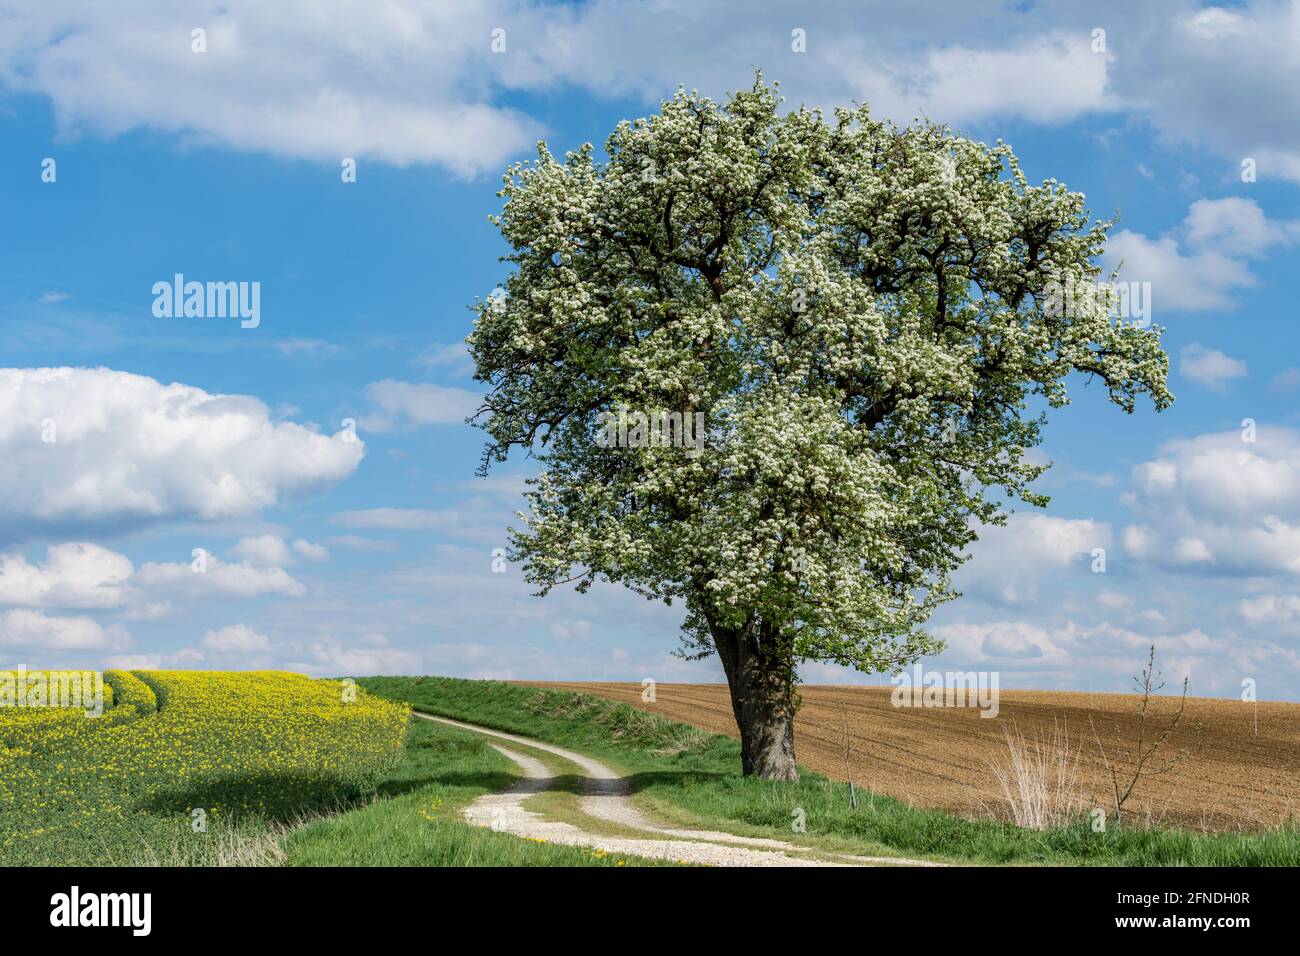 single solitary pear tree (pyrus communis) in full bloom in spring, growing at a farm road next to a canola or rapeseed field in bloom Stock Photo